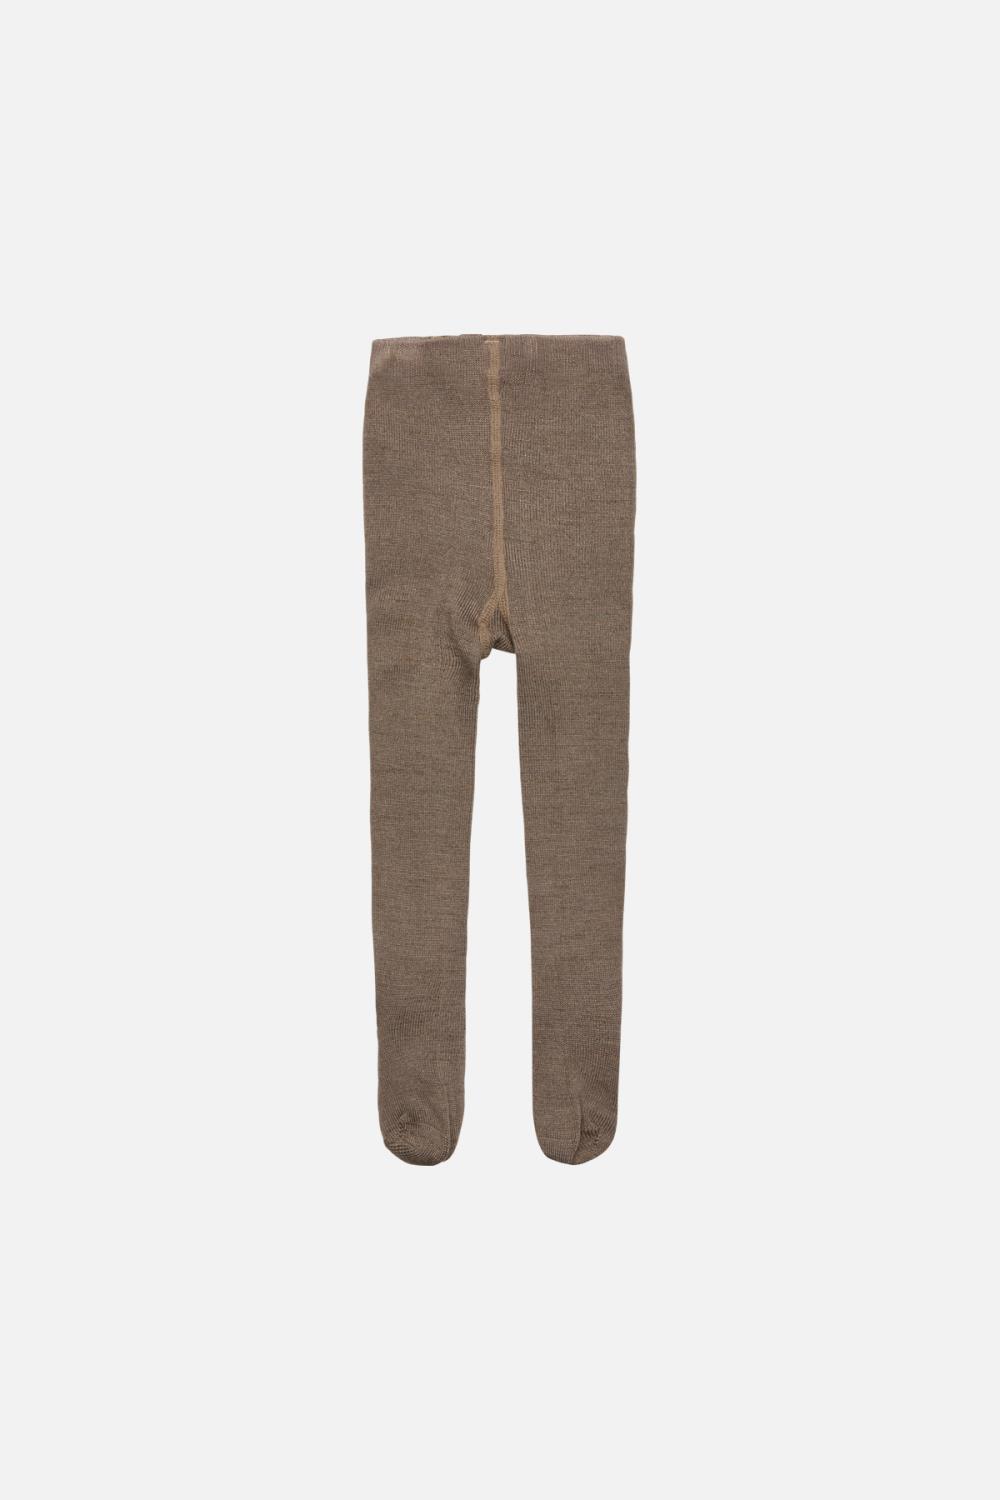 Hust&Claire Foxie Wool/Bamboo - Biscuit